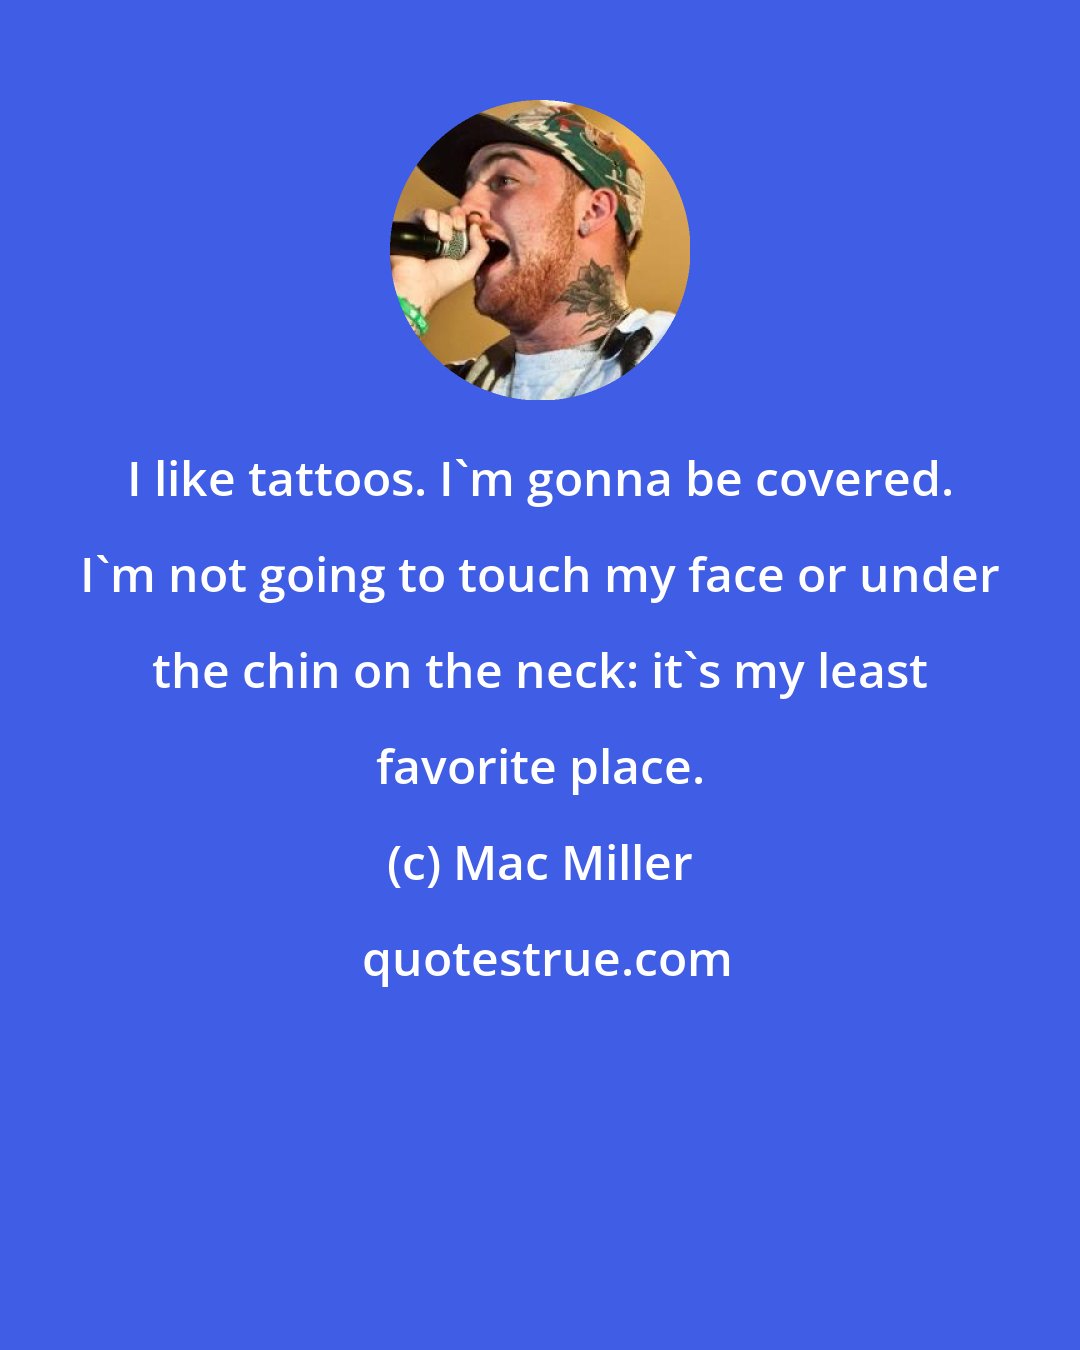 Mac Miller: I like tattoos. I'm gonna be covered. I'm not going to touch my face or under the chin on the neck: it's my least favorite place.